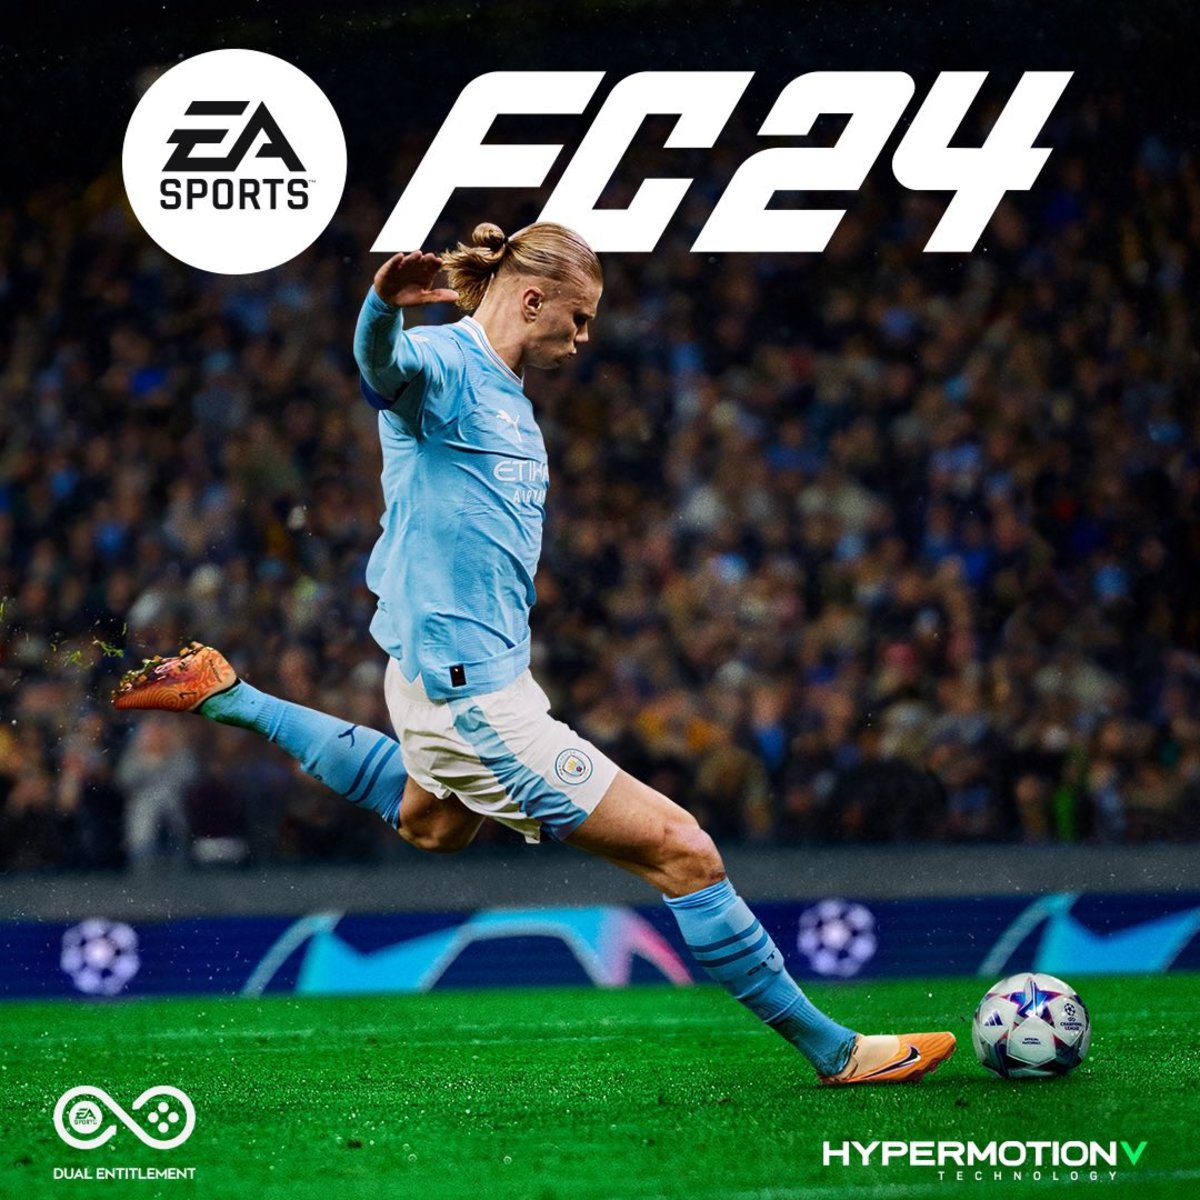 Erling Haaland pictured on the front cover of EA Sports' FC 24 video game